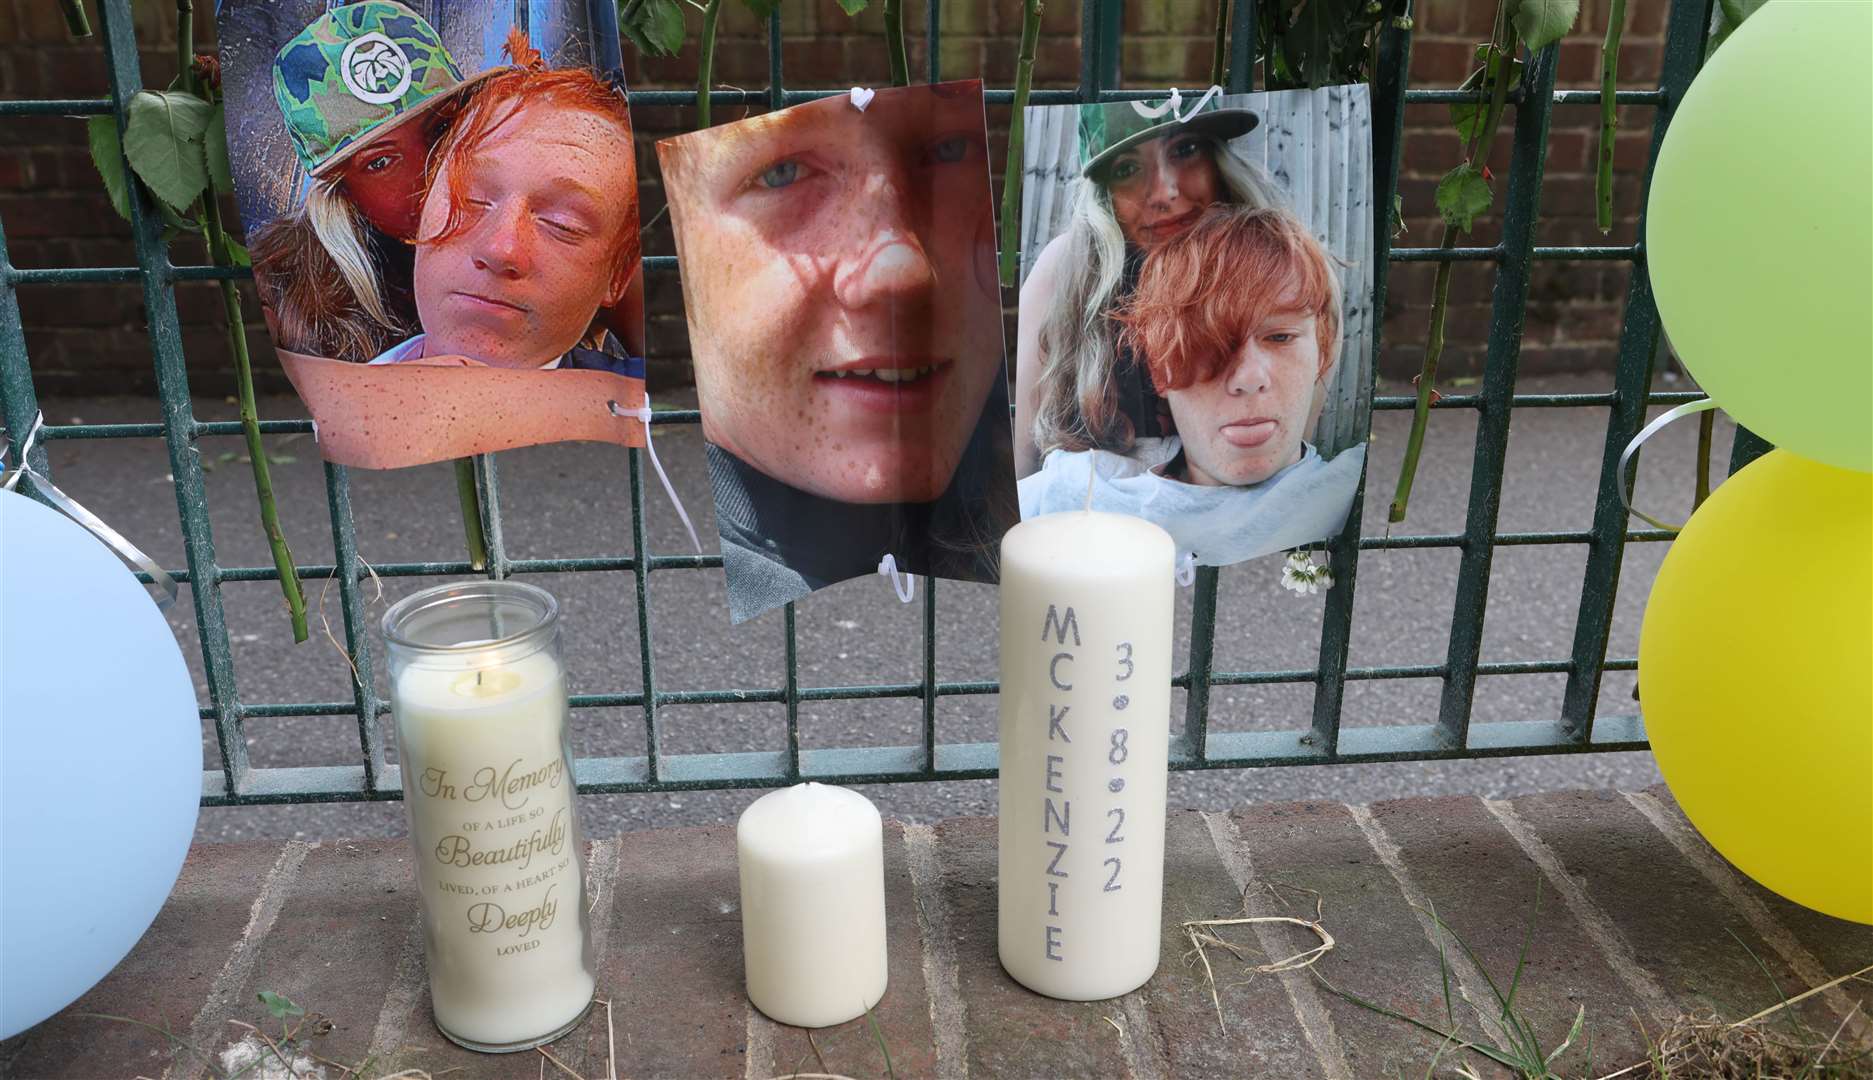 Candles and pictures were placed near the fairground. Photo: UKNIP